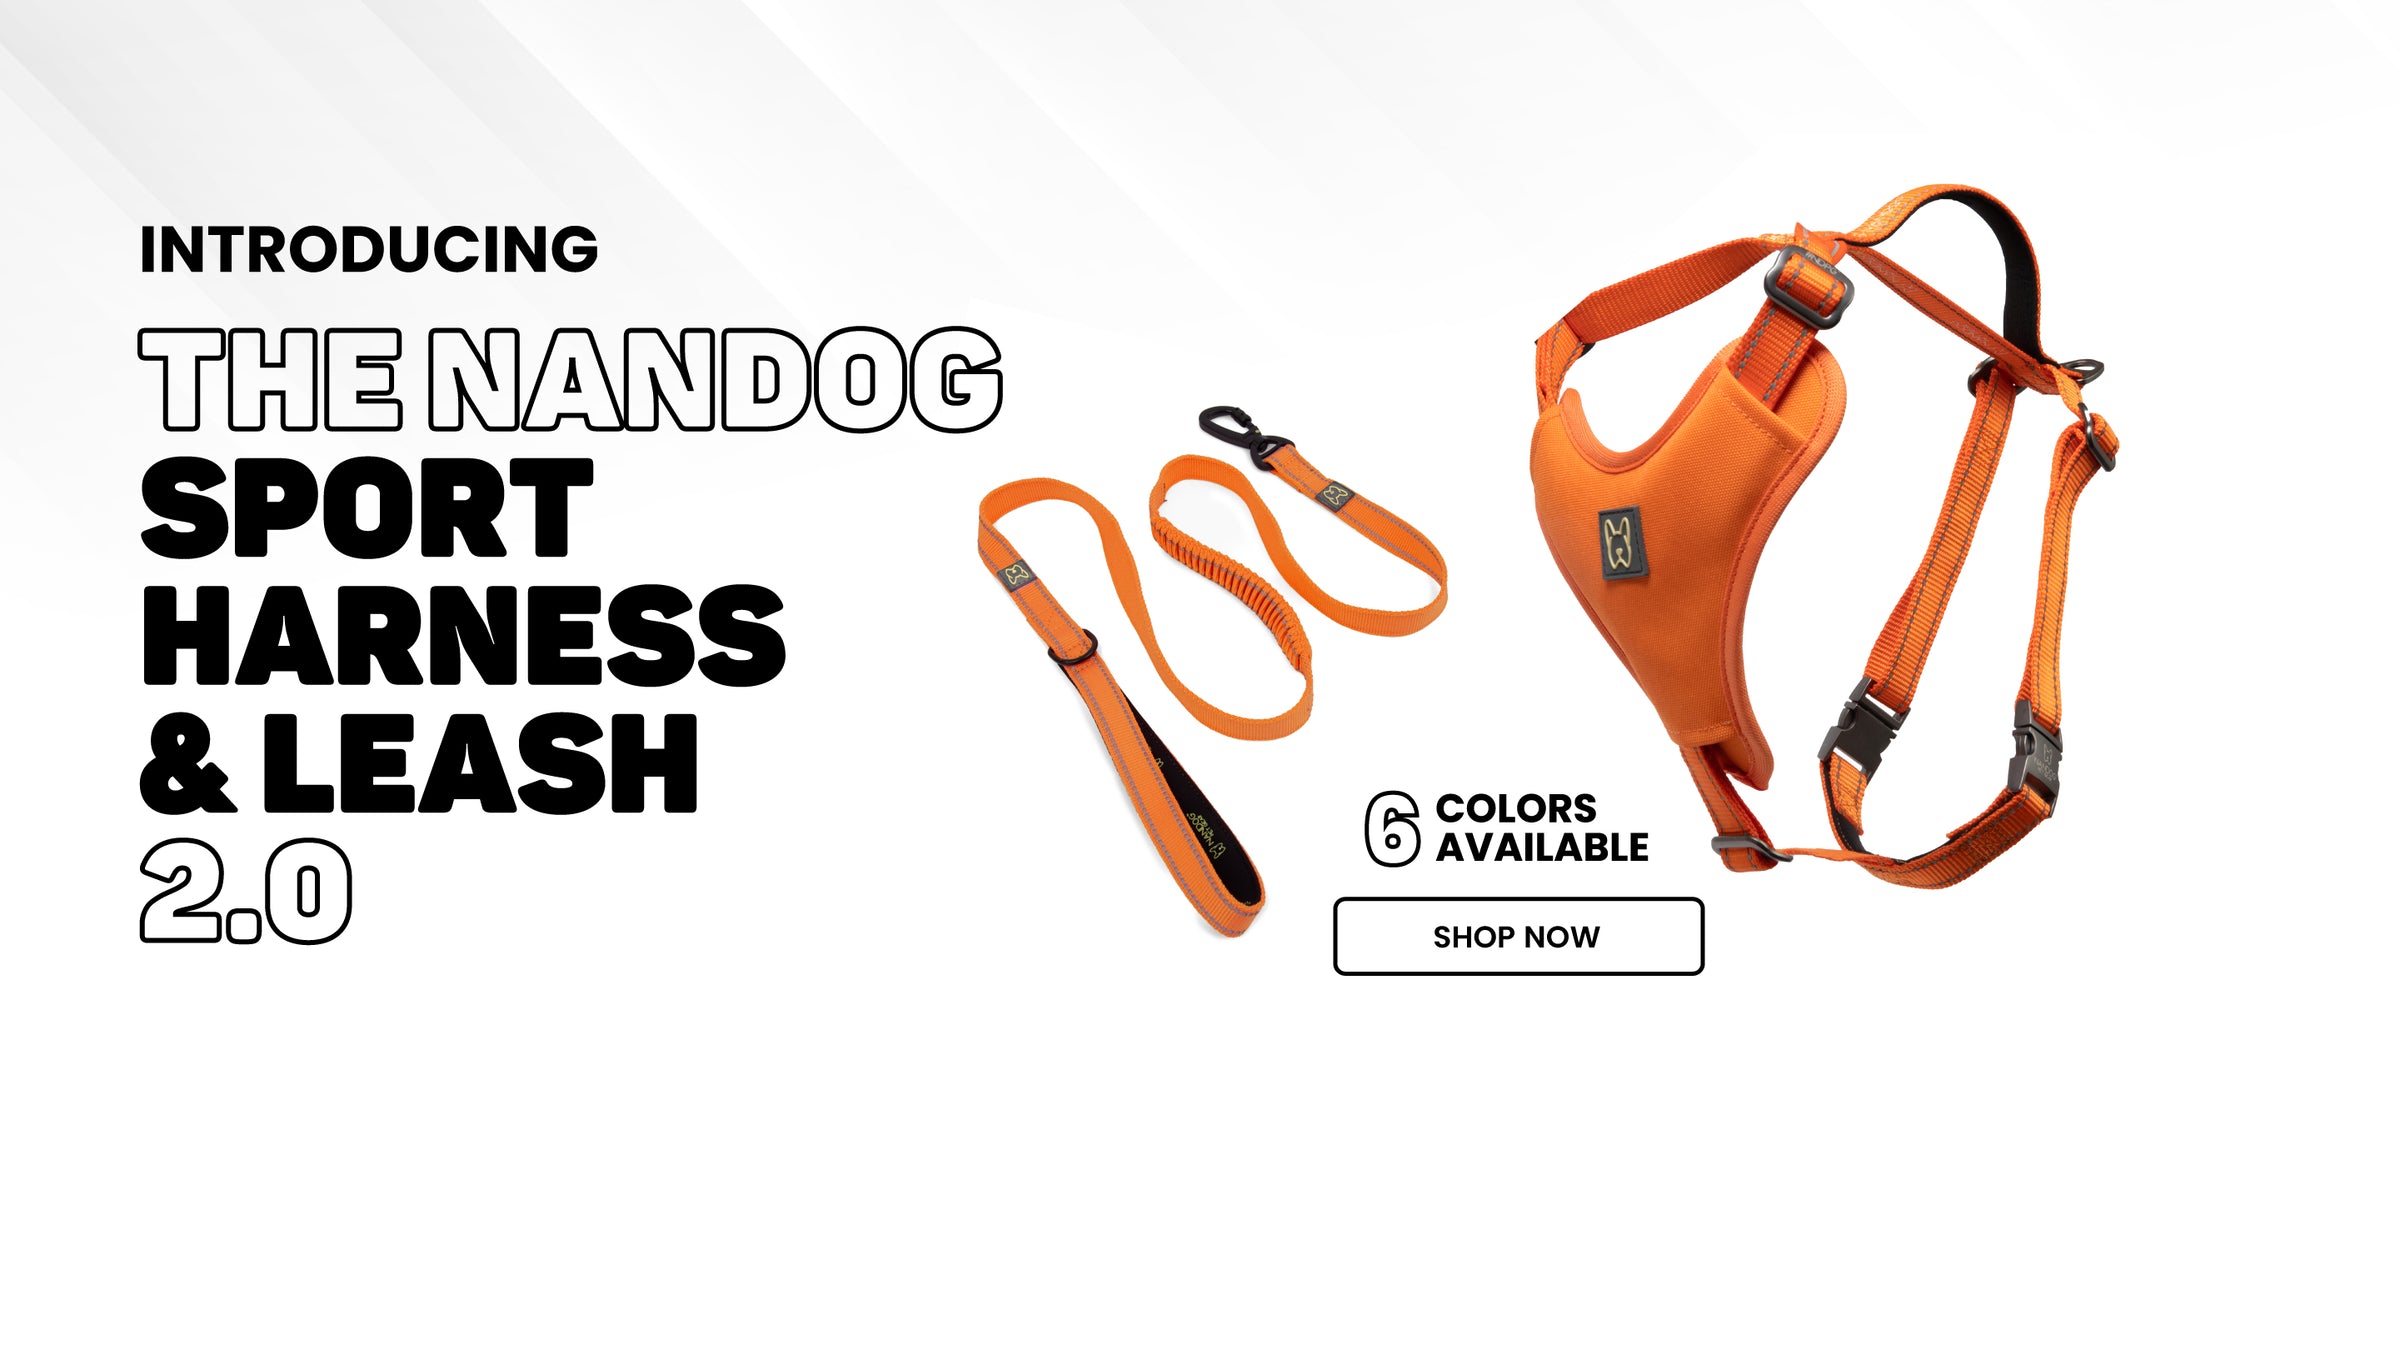 Harness and Leash 2.0 from Nandog Pet Gear